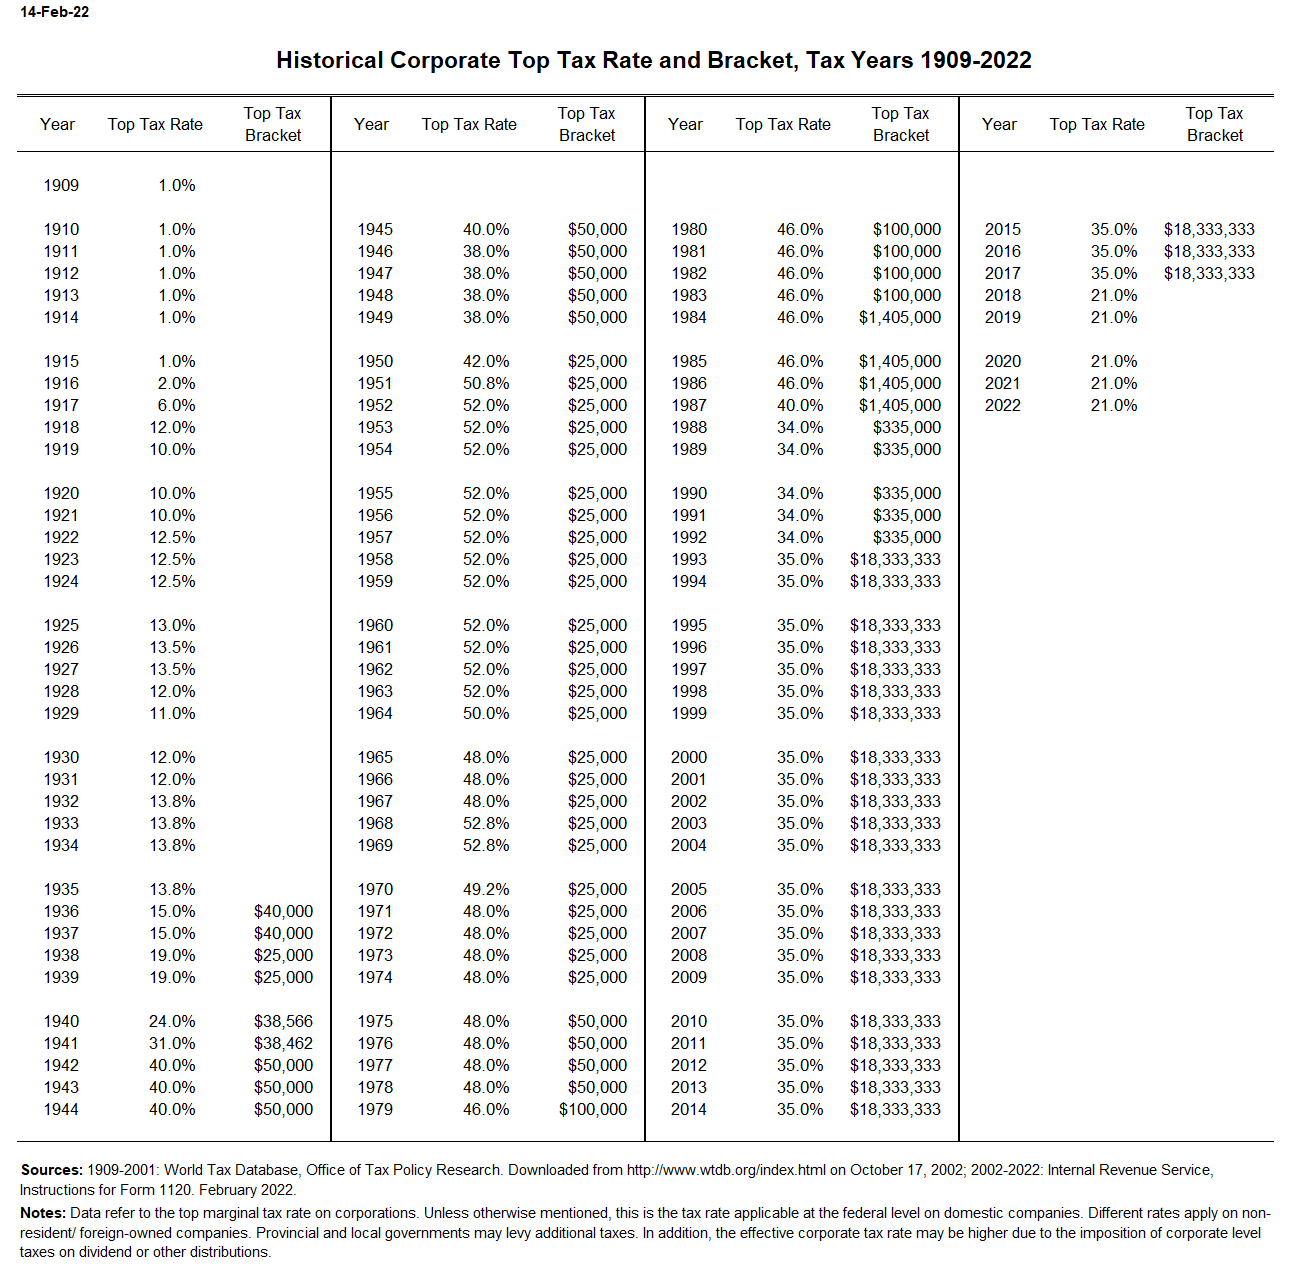 Corporate Top Tax Rate and Bracket | Tax Policy Center